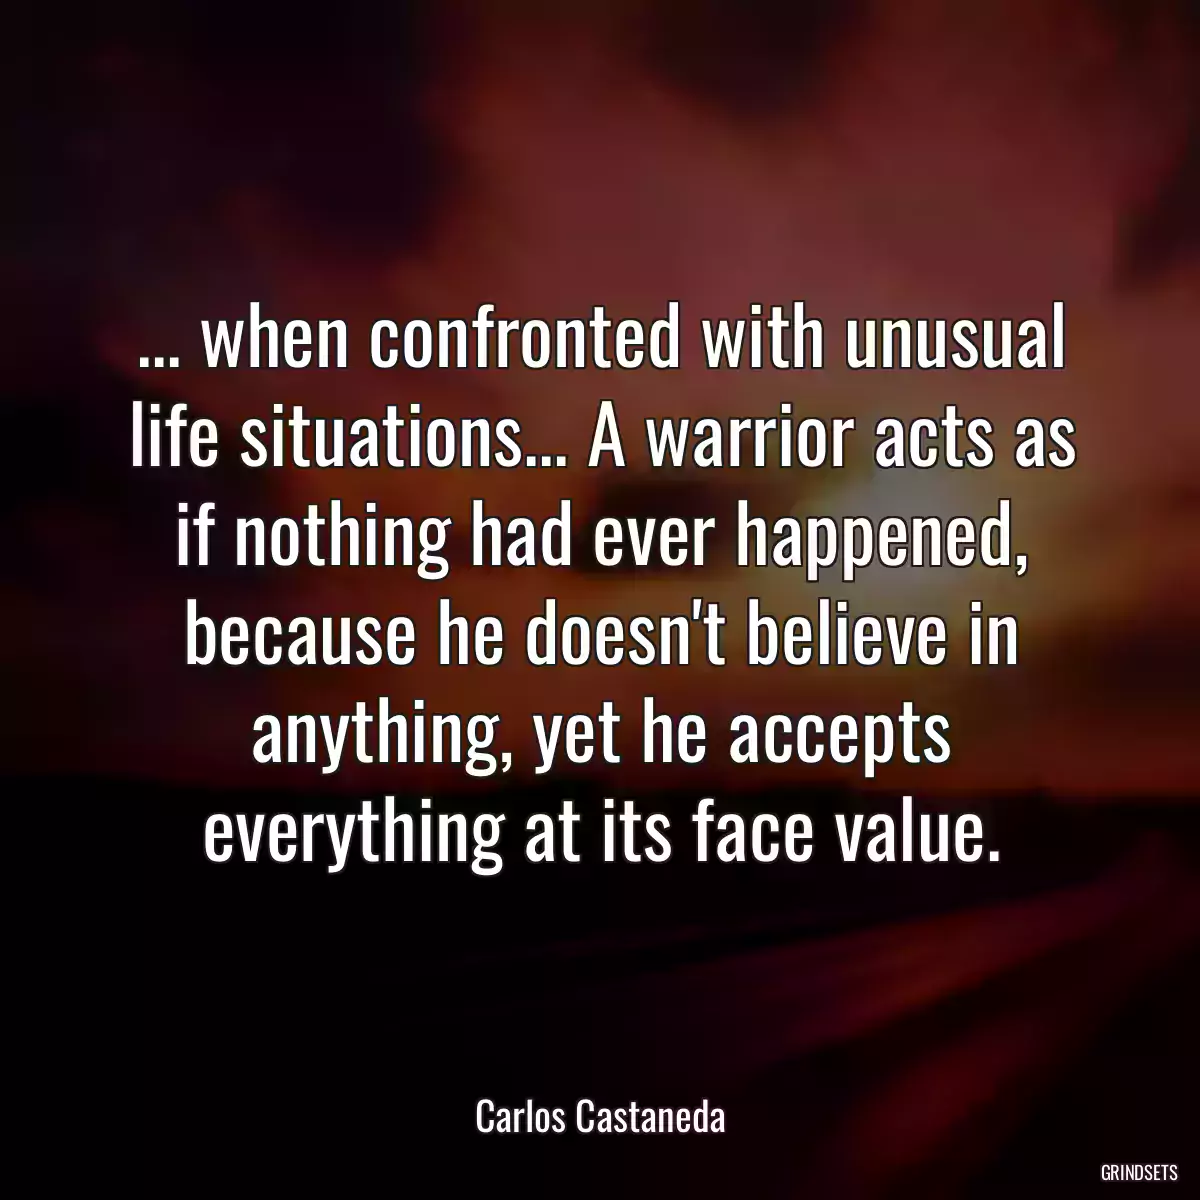 ... when confronted with unusual life situations... A warrior acts as if nothing had ever happened, because he doesn\'t believe in anything, yet he accepts everything at its face value.